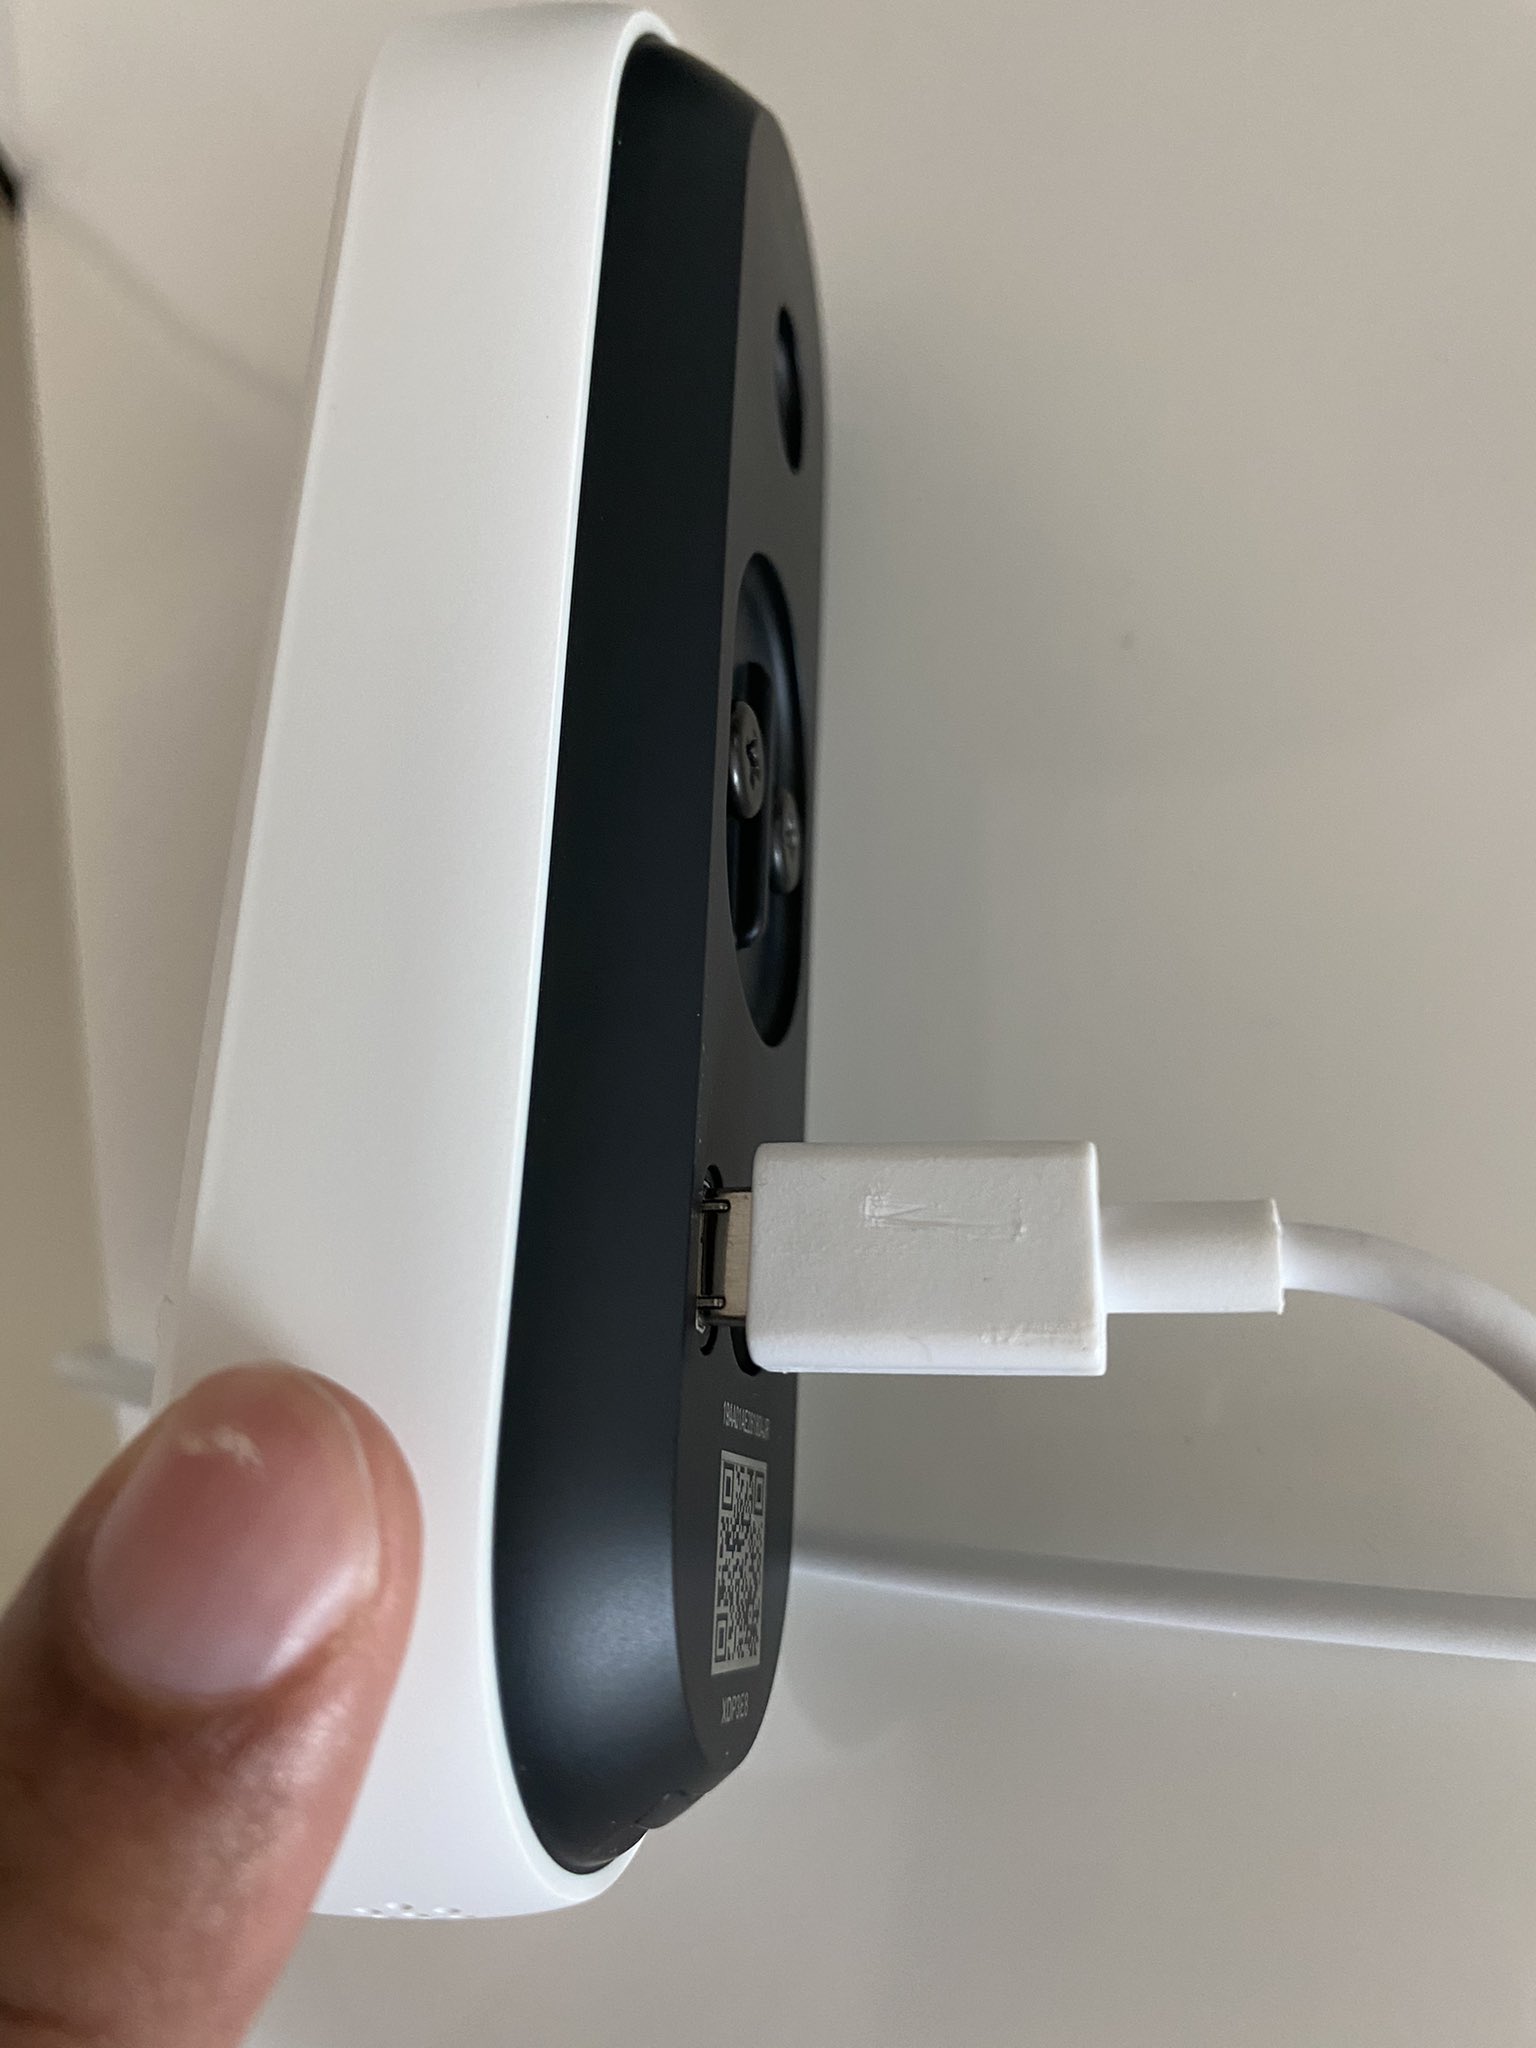 Made by Google on Twitter: "@krthkk Hey Karthik, reaching out. While being connected to the USB cord provides power to the Nest Hello unit, it's not advisable considering that the